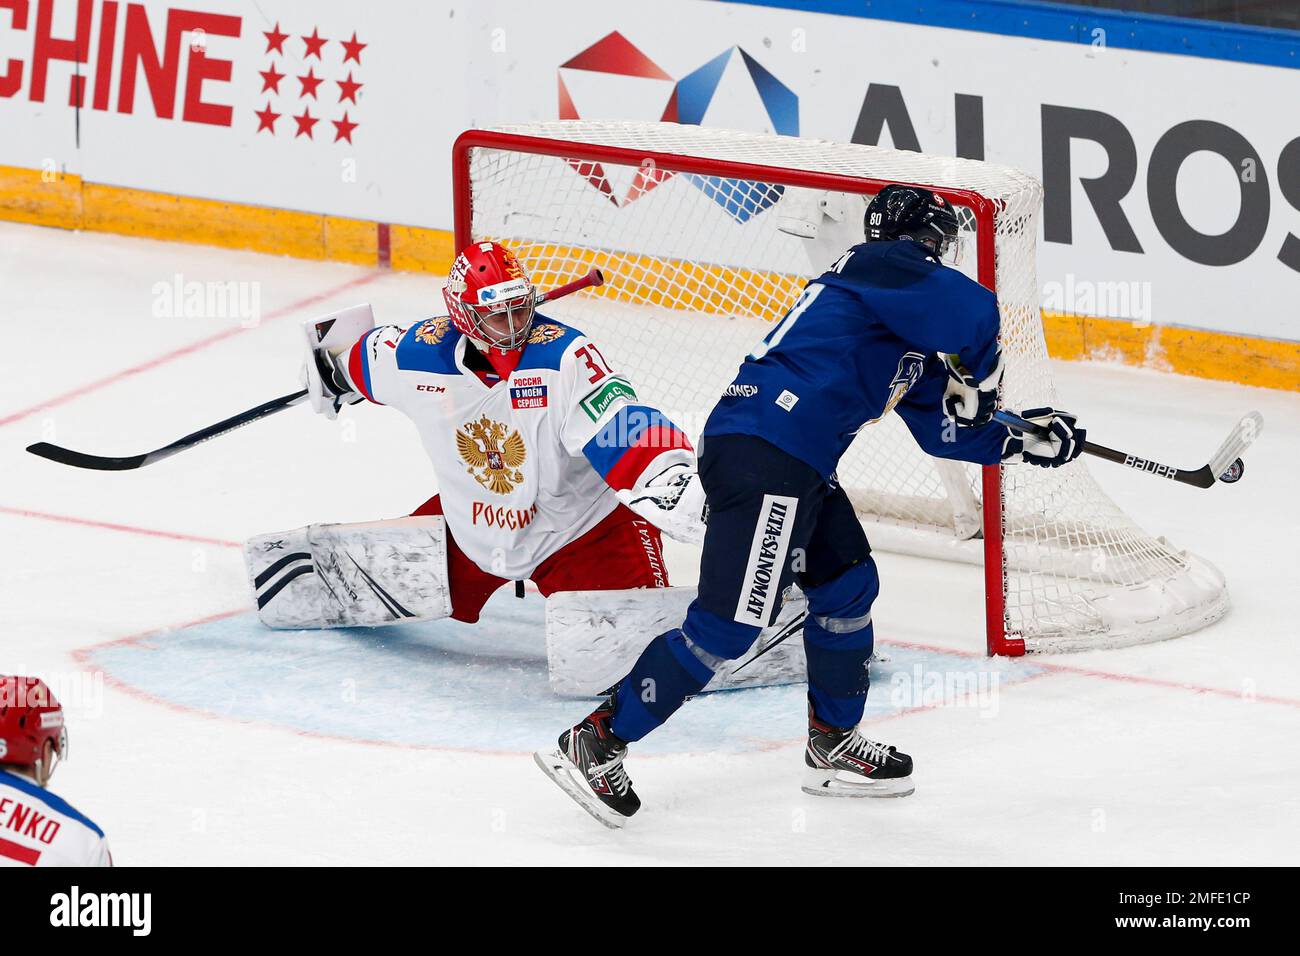 Finlands Teemu Turunen, right, tries to score against Russias goalie Alexander Samonov during the Channel One Cup ice hockey match between Russia and Finland in Moscow, Russia, Sunday, Dec